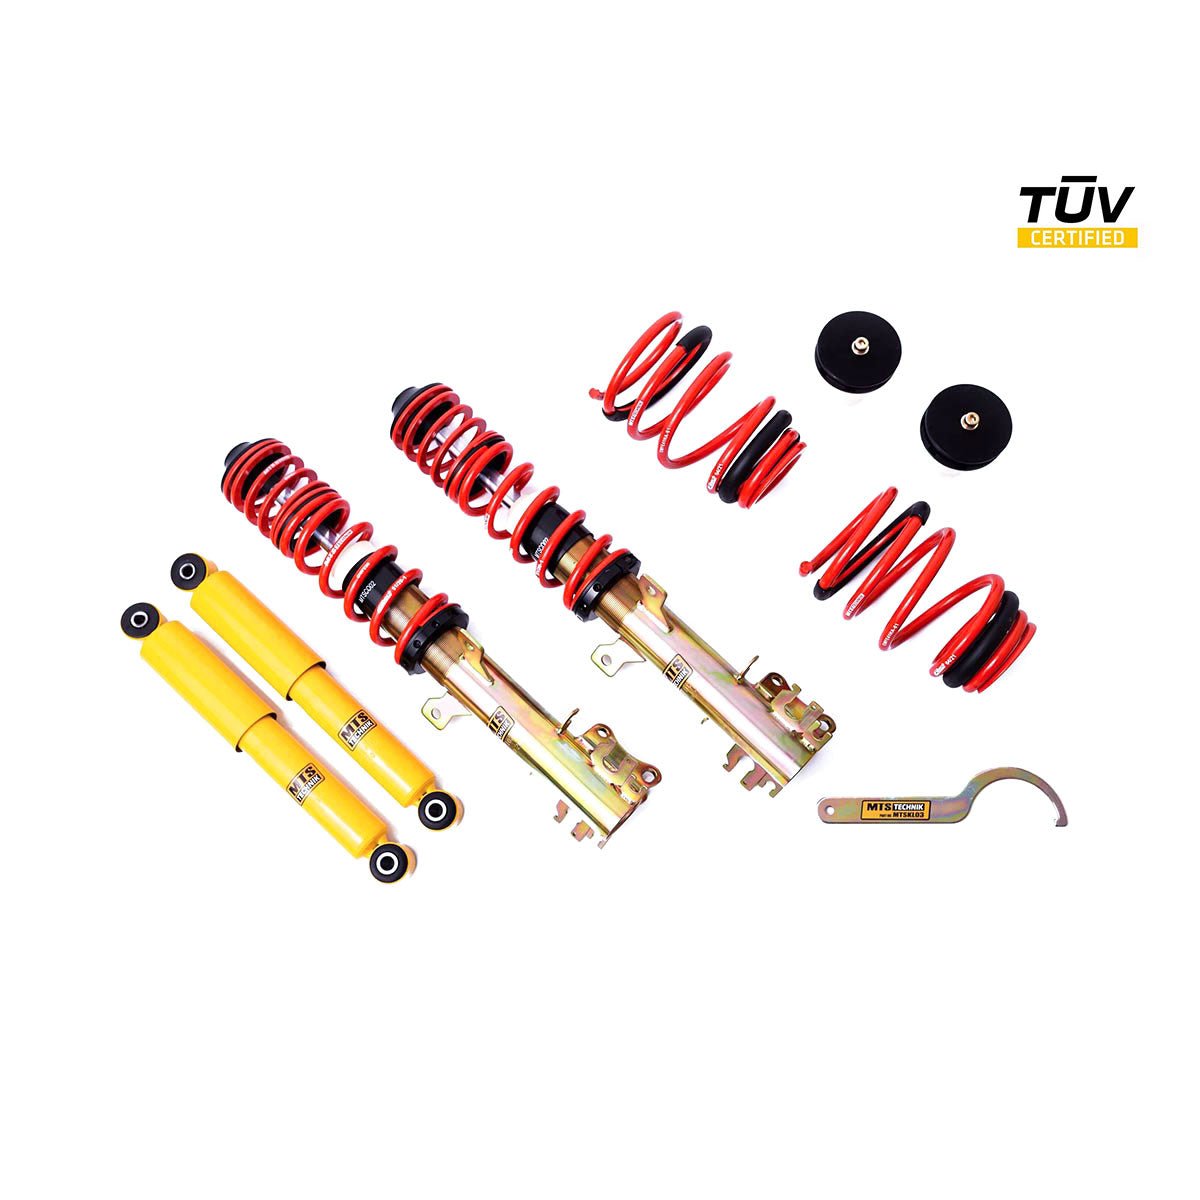 MTS TECHNIK coilover kit STREET Fiat 500 (with TÜV) - PARTS33 GmbH